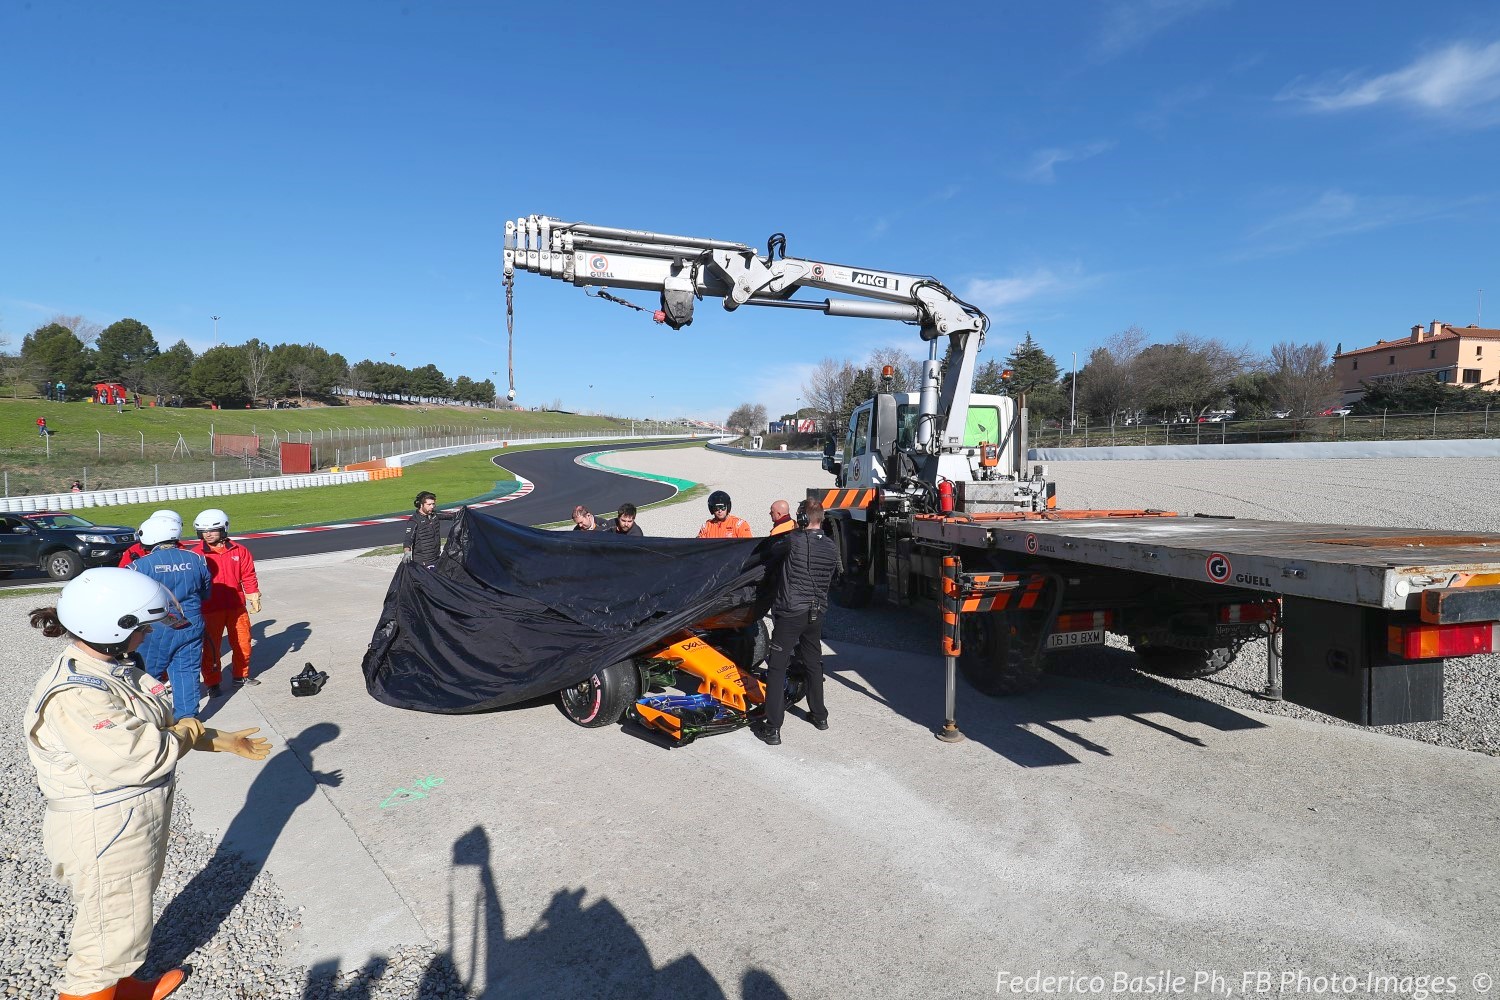 If the McLaren comes back on the flatbed much more Alonso will quit